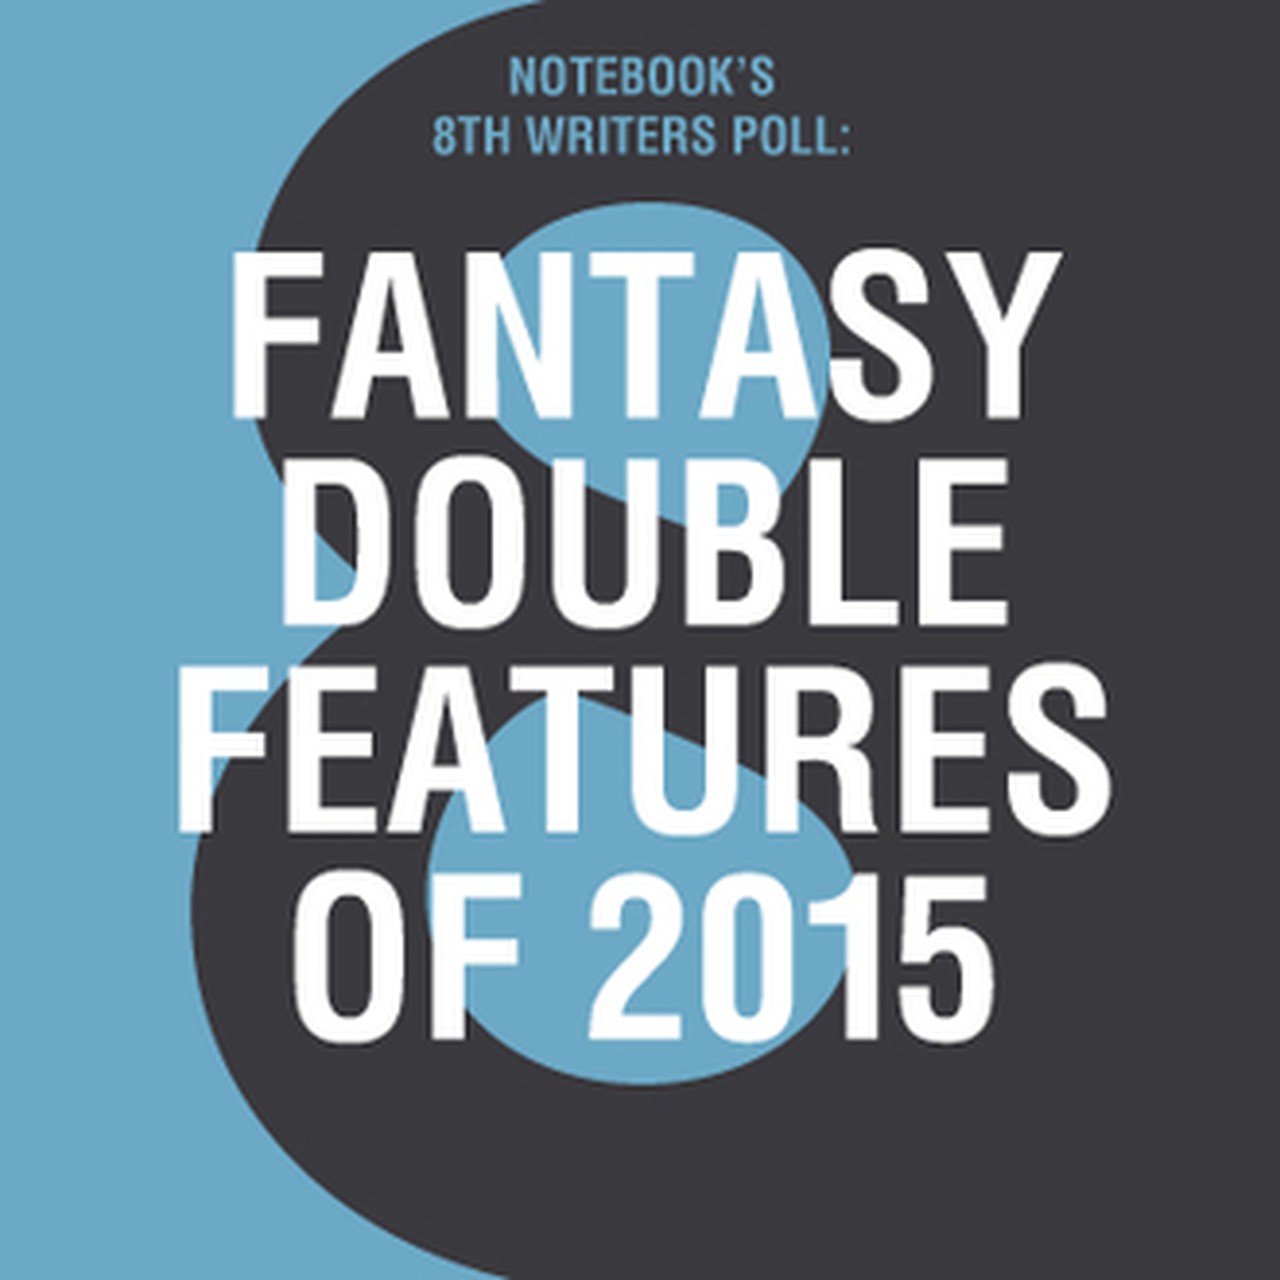 Dani Daniel Trap Rape Porn - Notebook's 8th Writers Poll: Fantasy Double Features of 2015 on Notebook |  MUBI